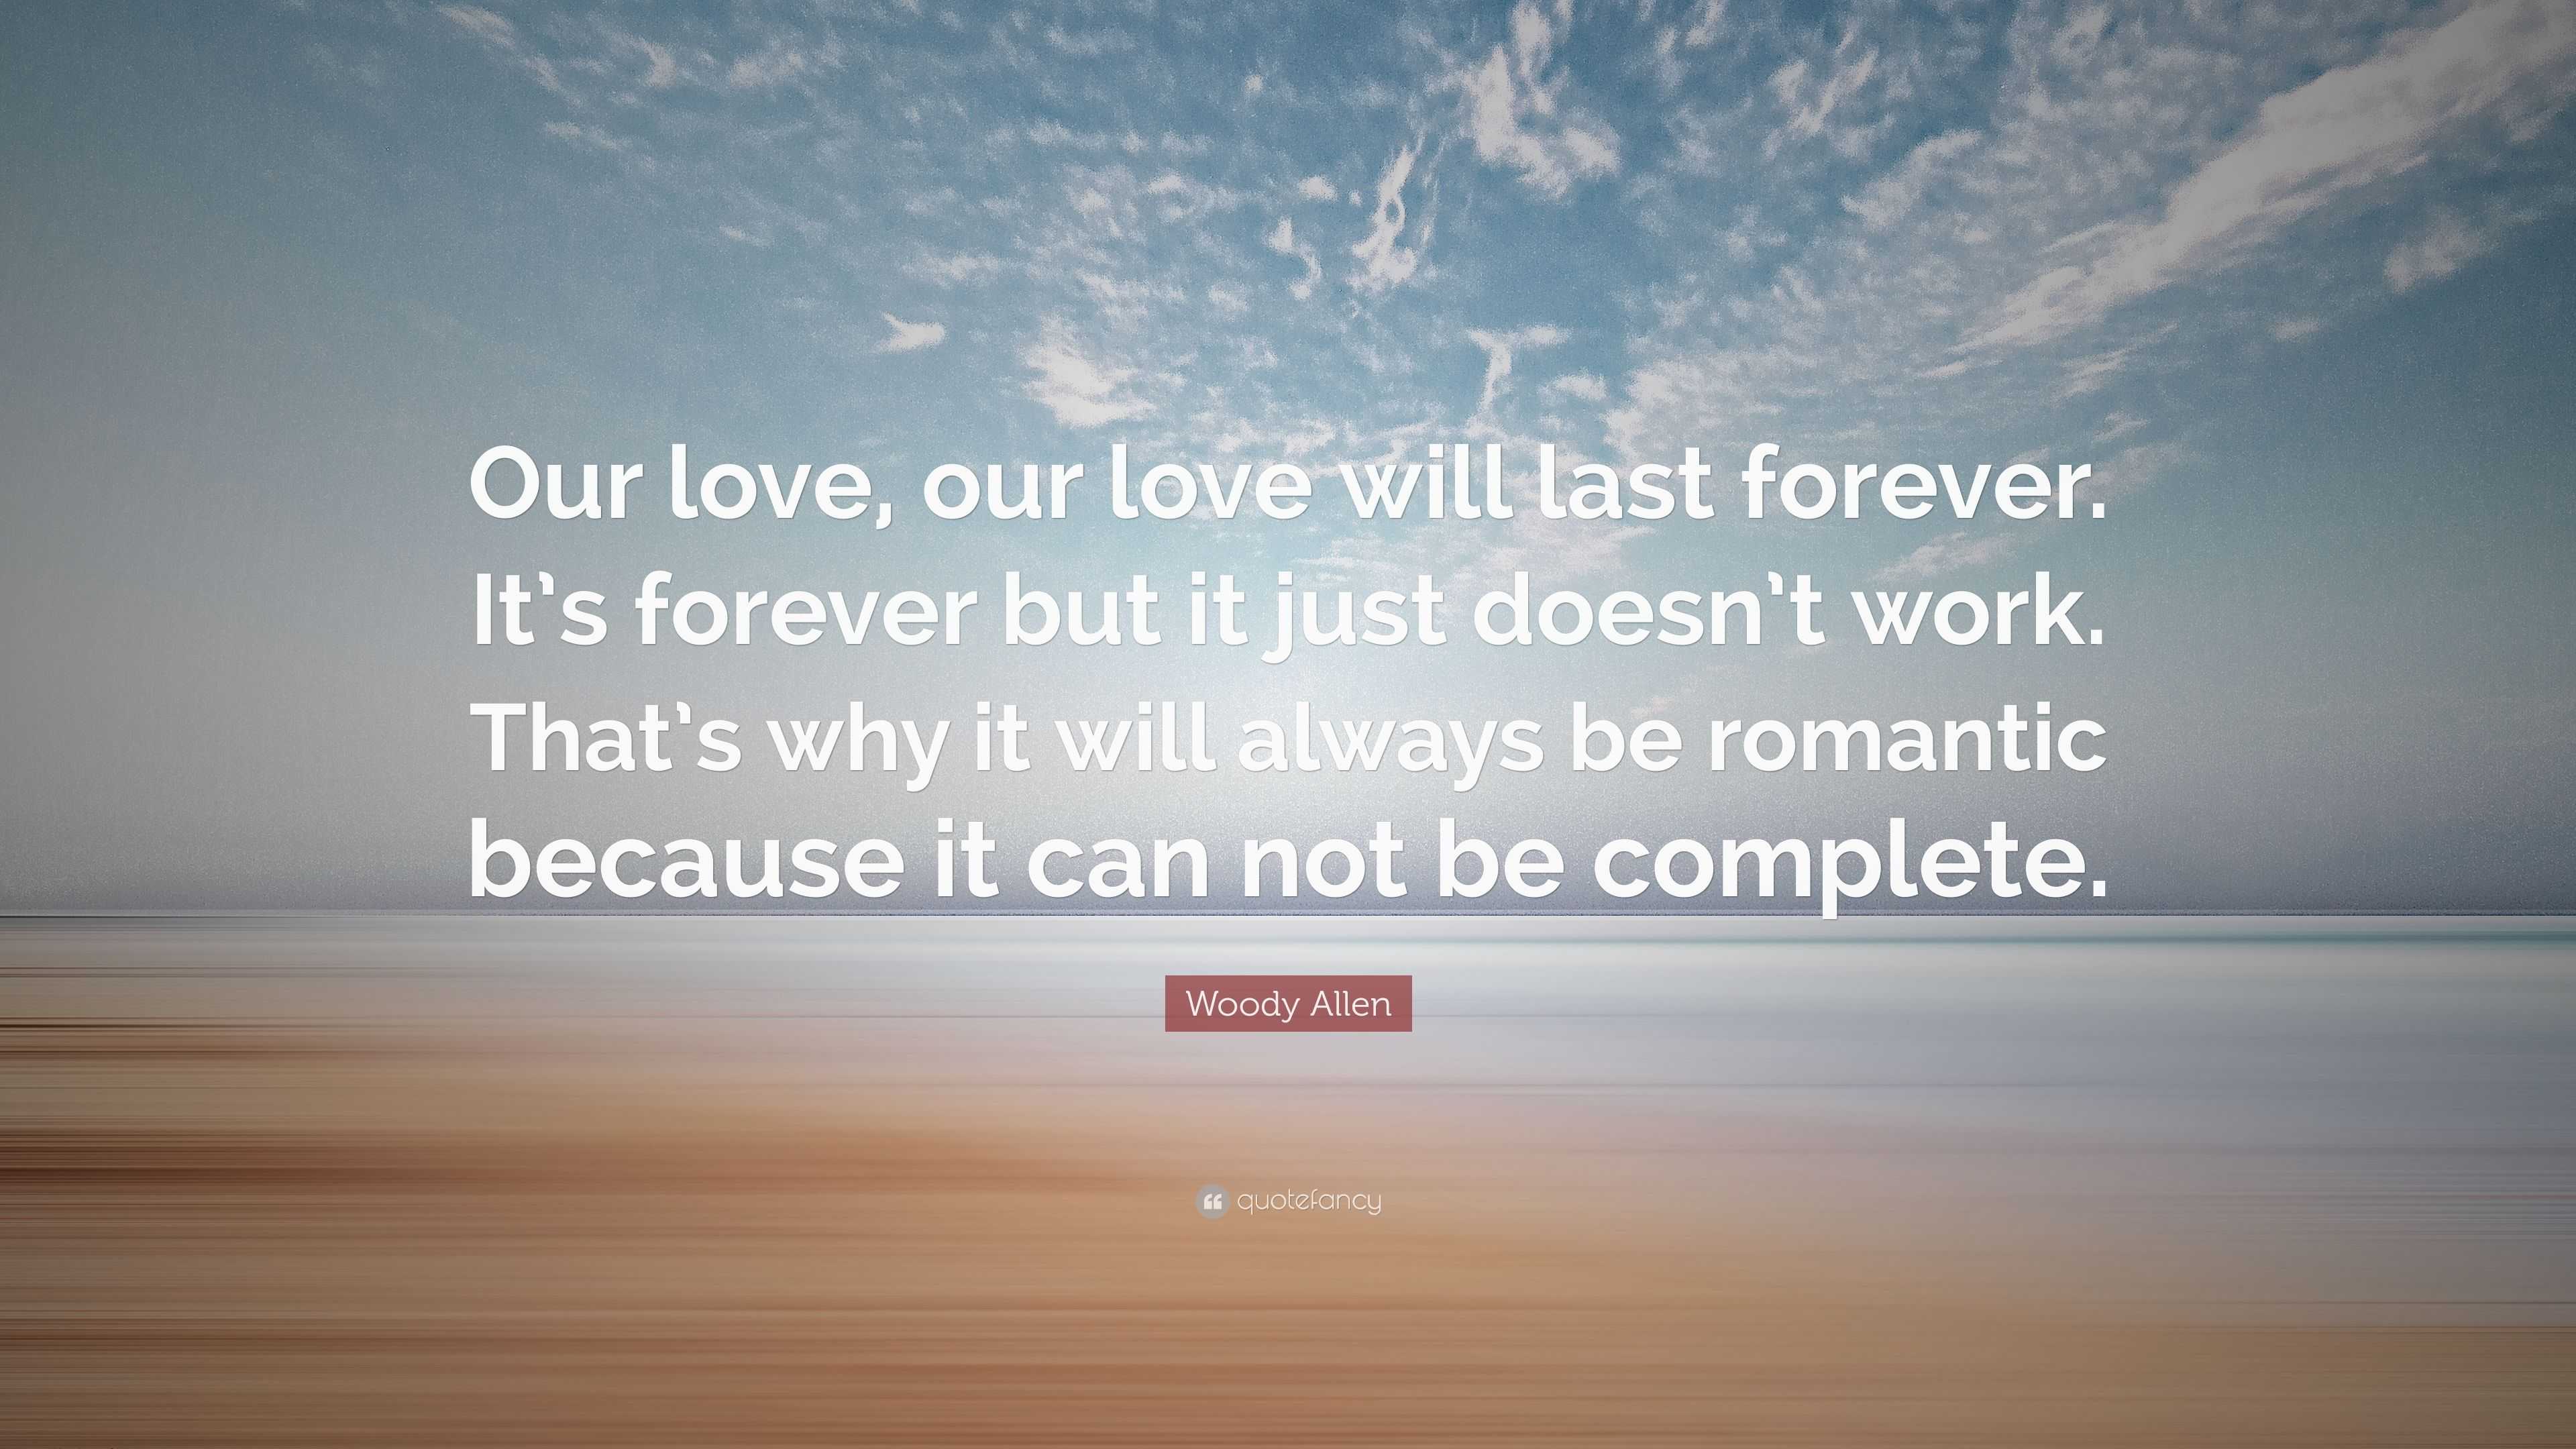 Woody Allen Quote “Our love our love will last forever It s forever